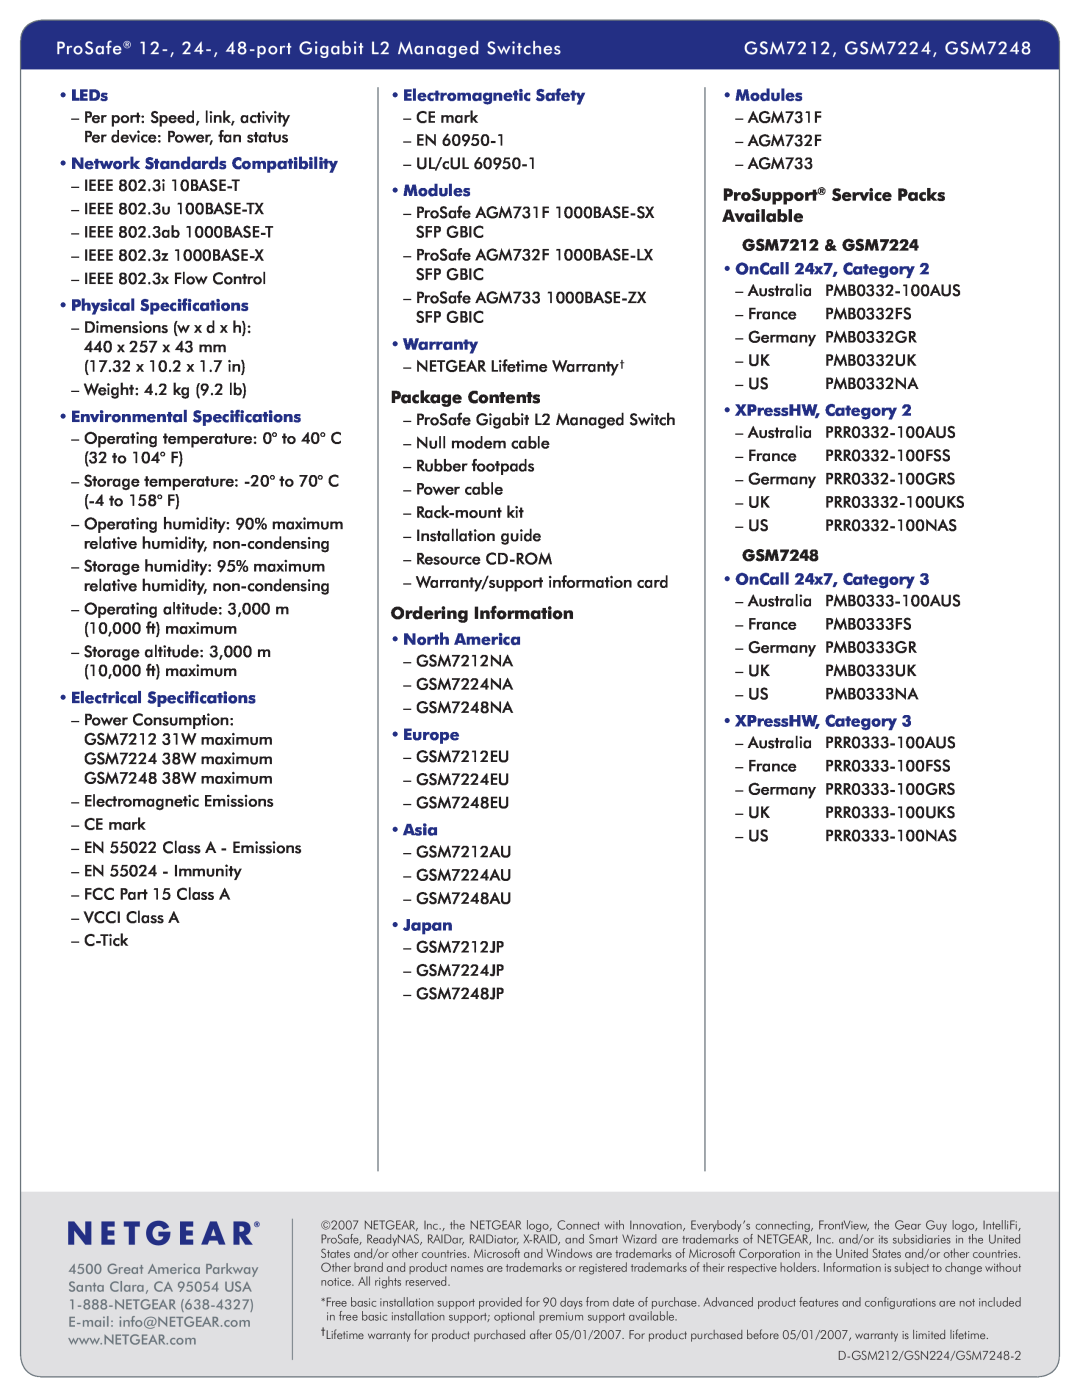 NETGEAR manual Package Contents, Ordering Information, ProSupport Service Packs Available, GSM7212 & GSM7224, GSM7248 